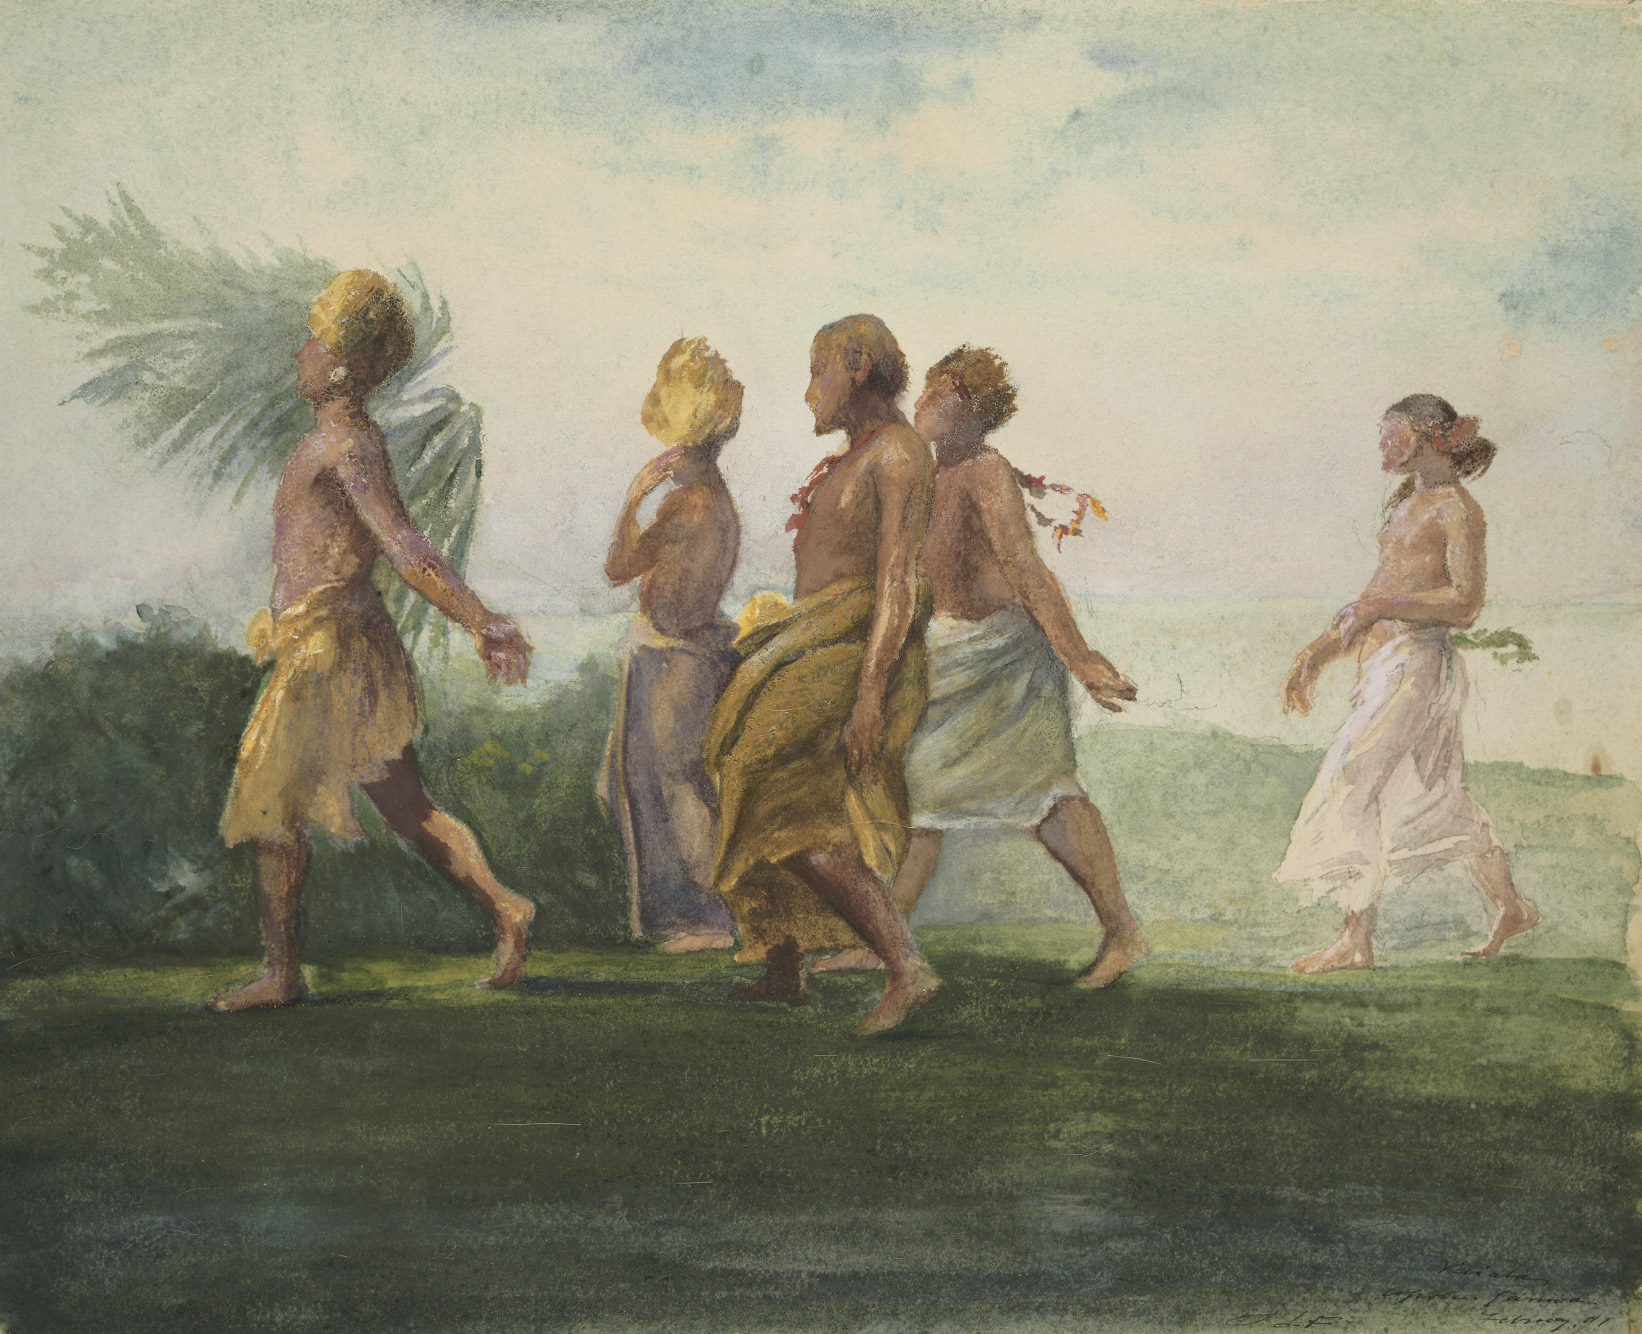 John La Farge, Chiefs and Chiefesses Passing on Their Way to a Great Conference. Evening. Samoa., 1891